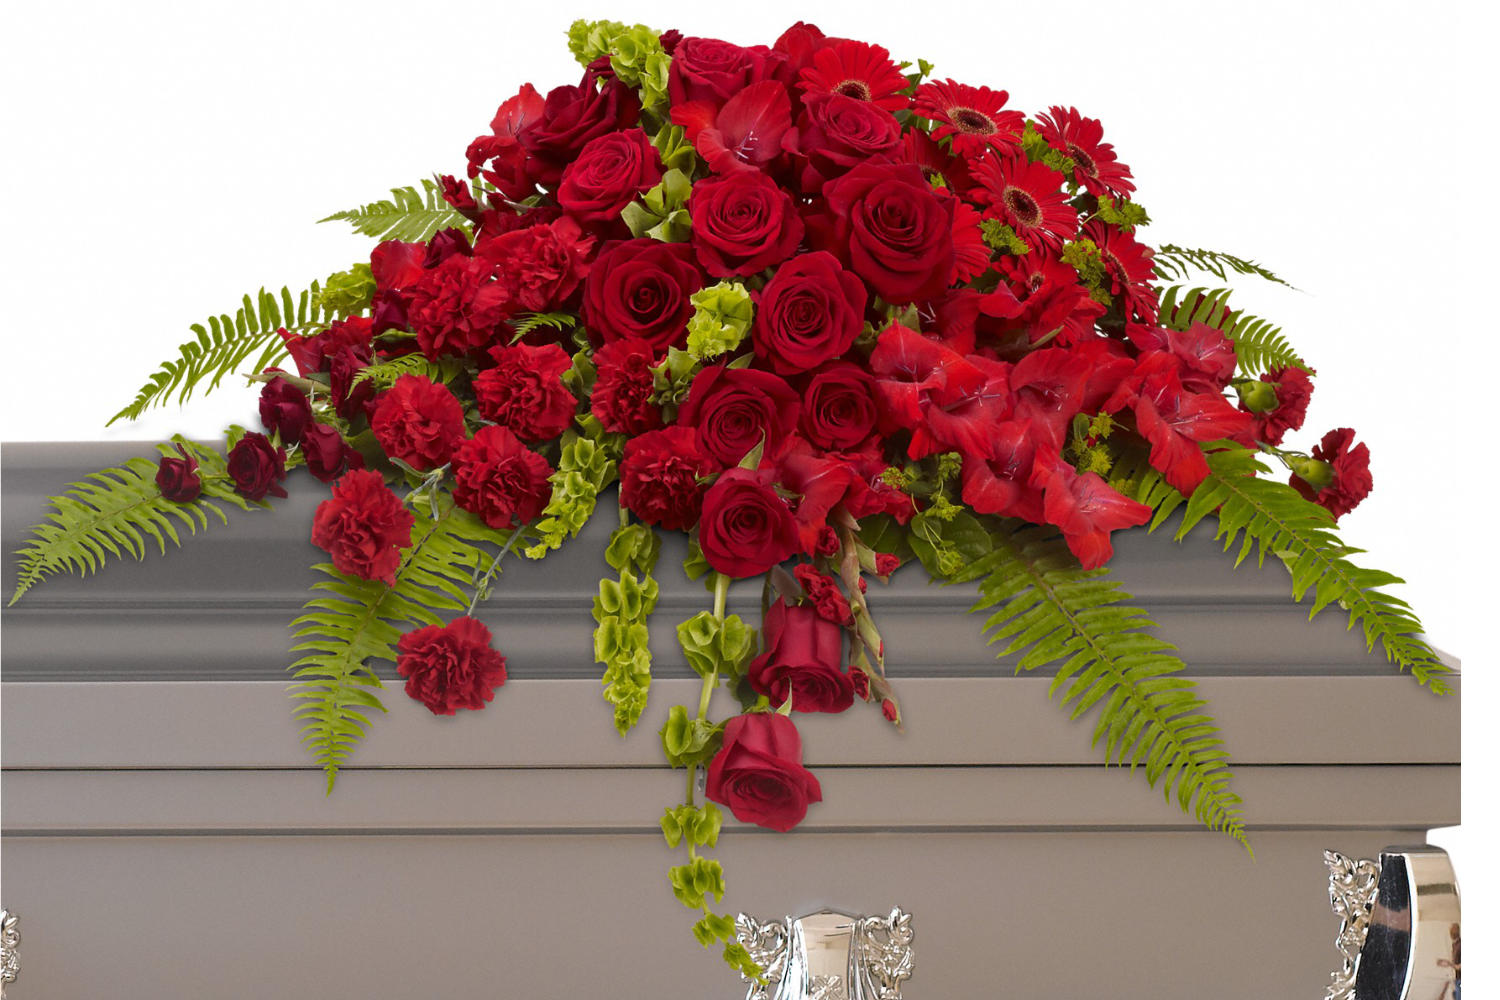 Funeral Flowers arrangement. Beautiful red roses, spray roses, gerberas, gladioli and carnations along with vibrant green bells of Ireland create a sincere tribute.